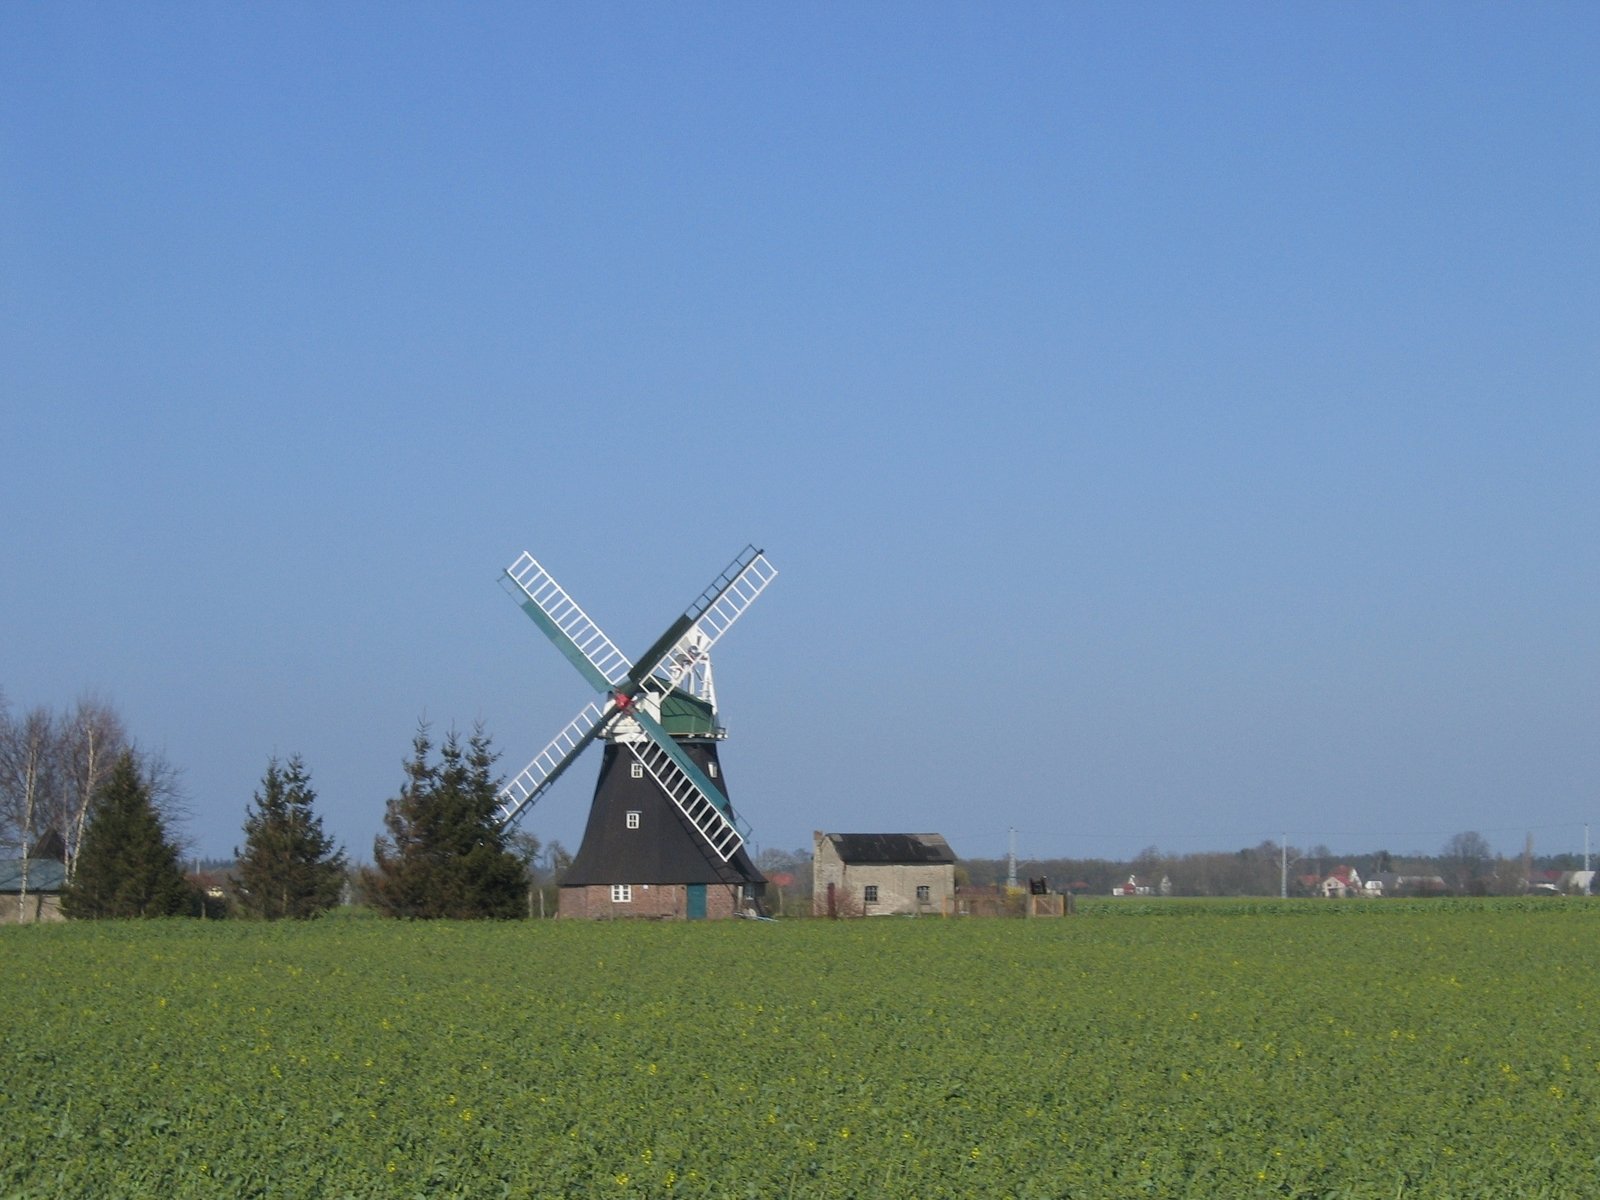 a windmill in a green field with trees behind it